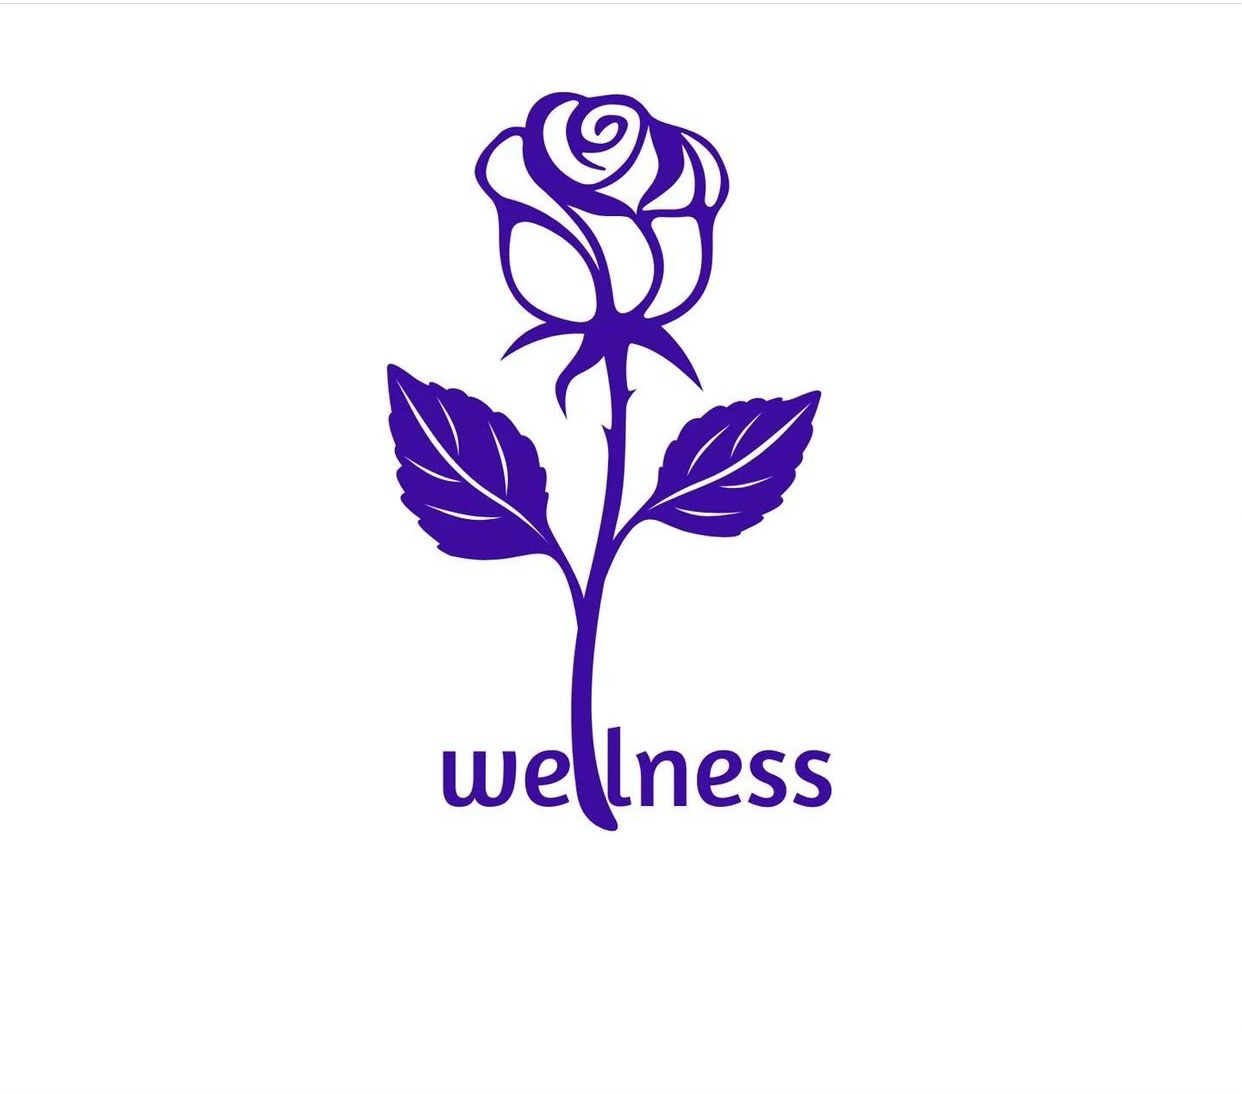 A purple rose that grows out of the word "wellness", also in purple.